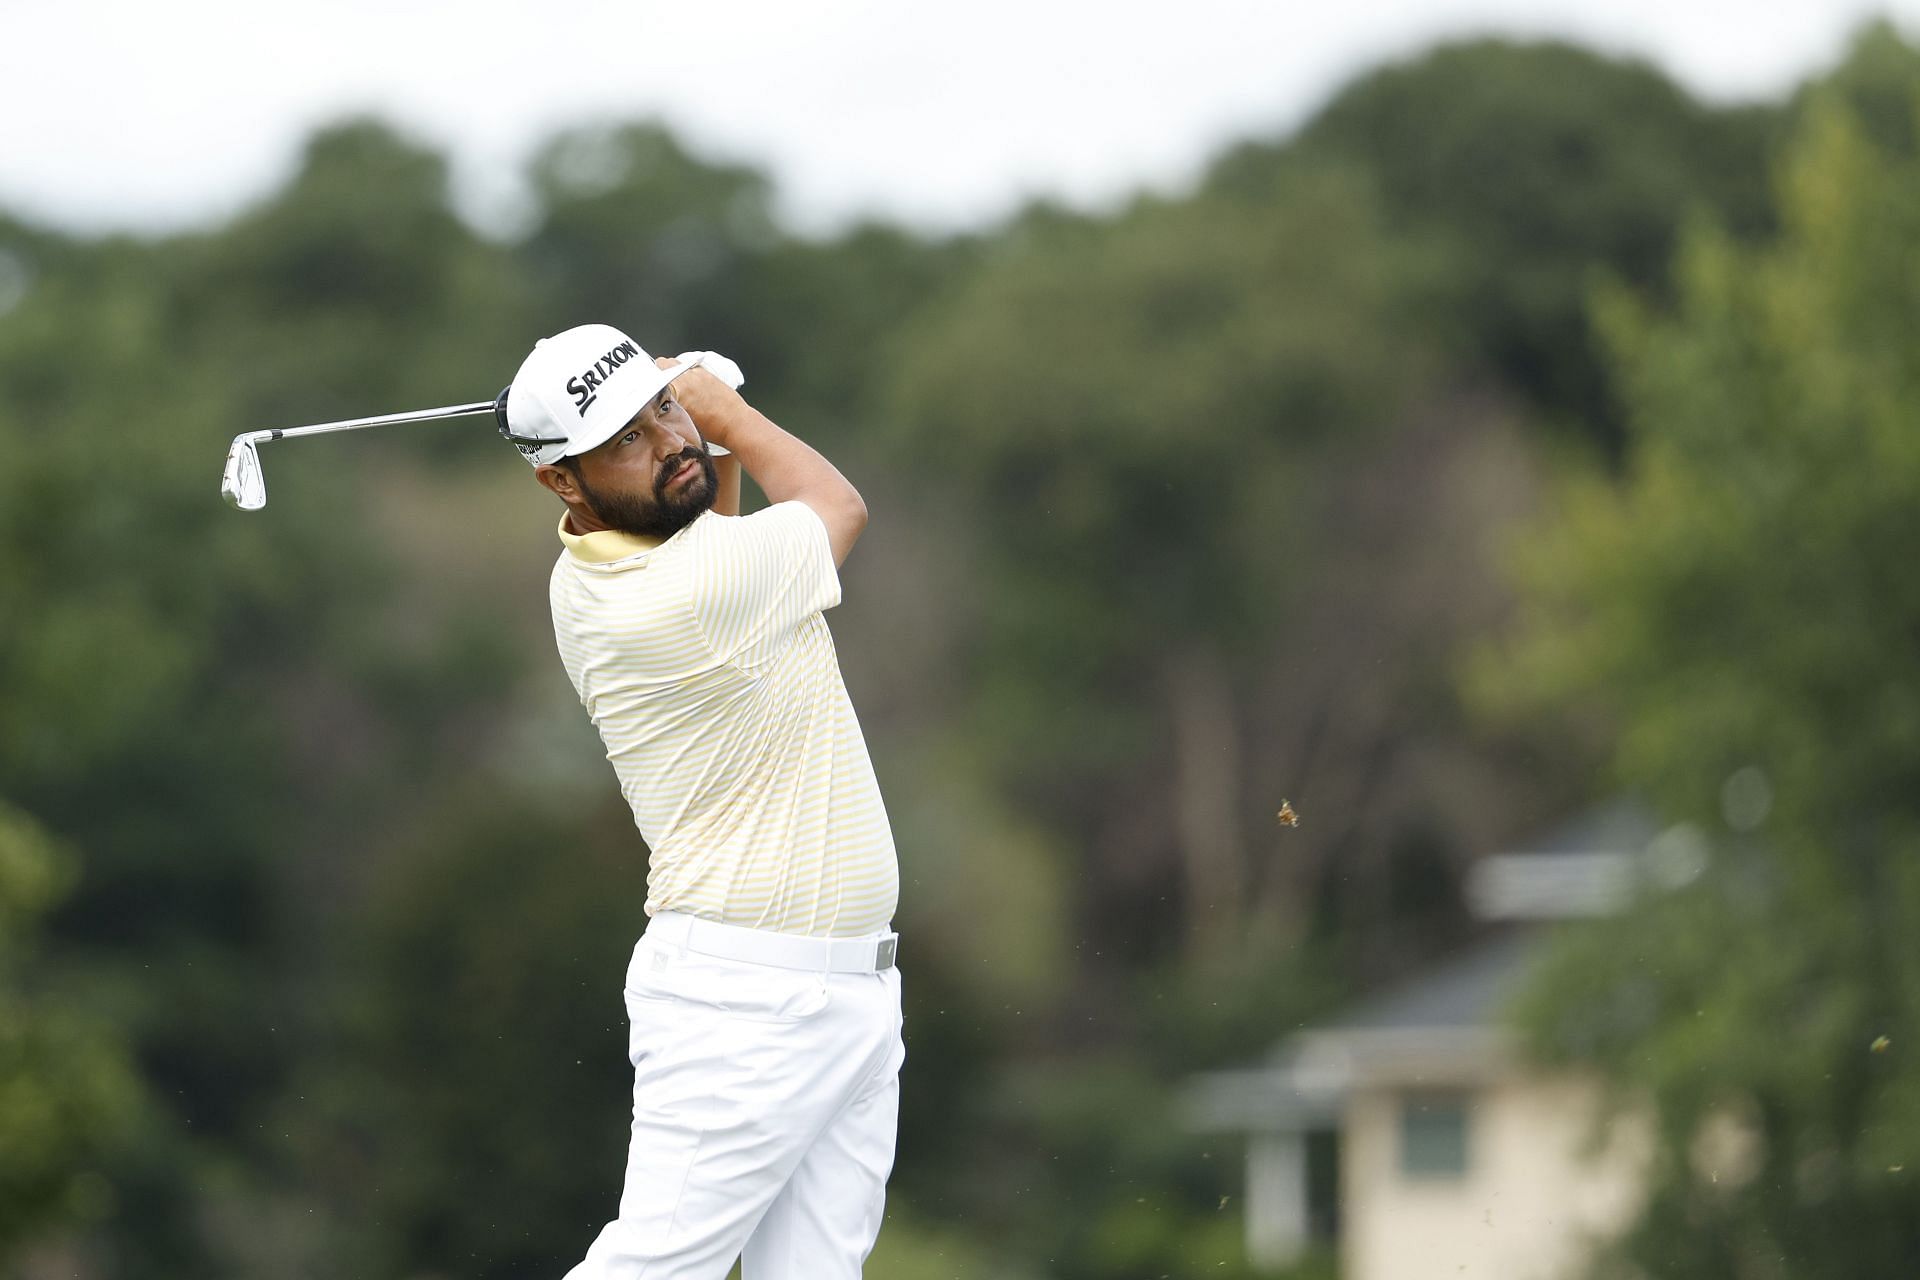 J.J. Spaun plays his shot from the fourth tee during the third round of the 3M Open